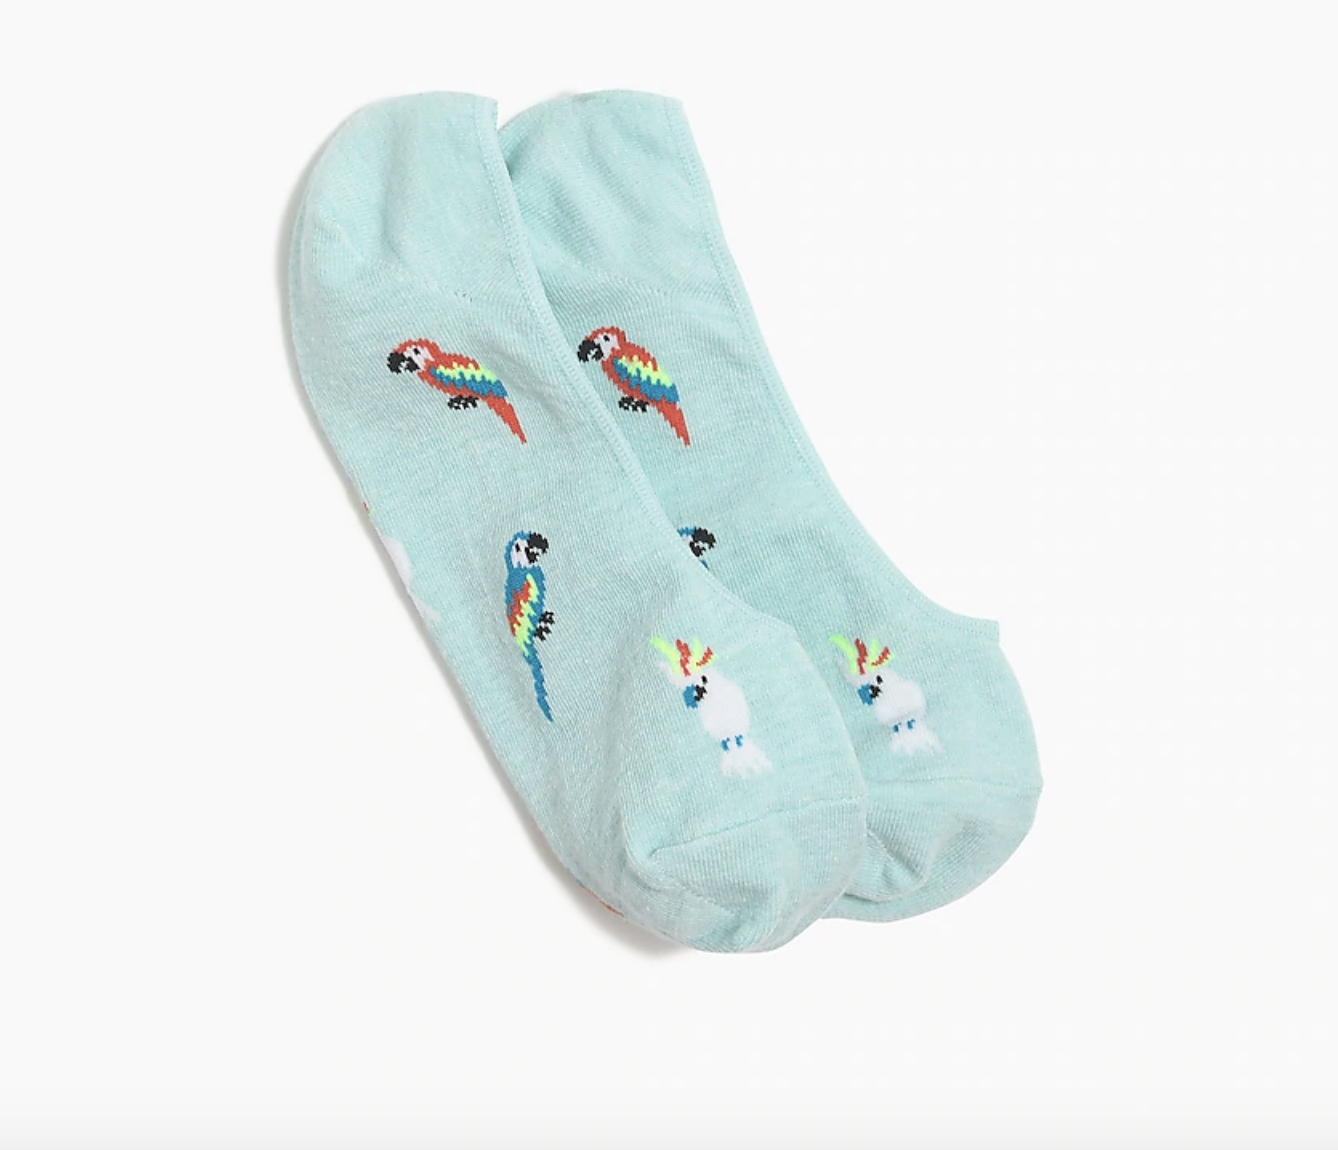 the turquoise socks, which have different color parrots on them